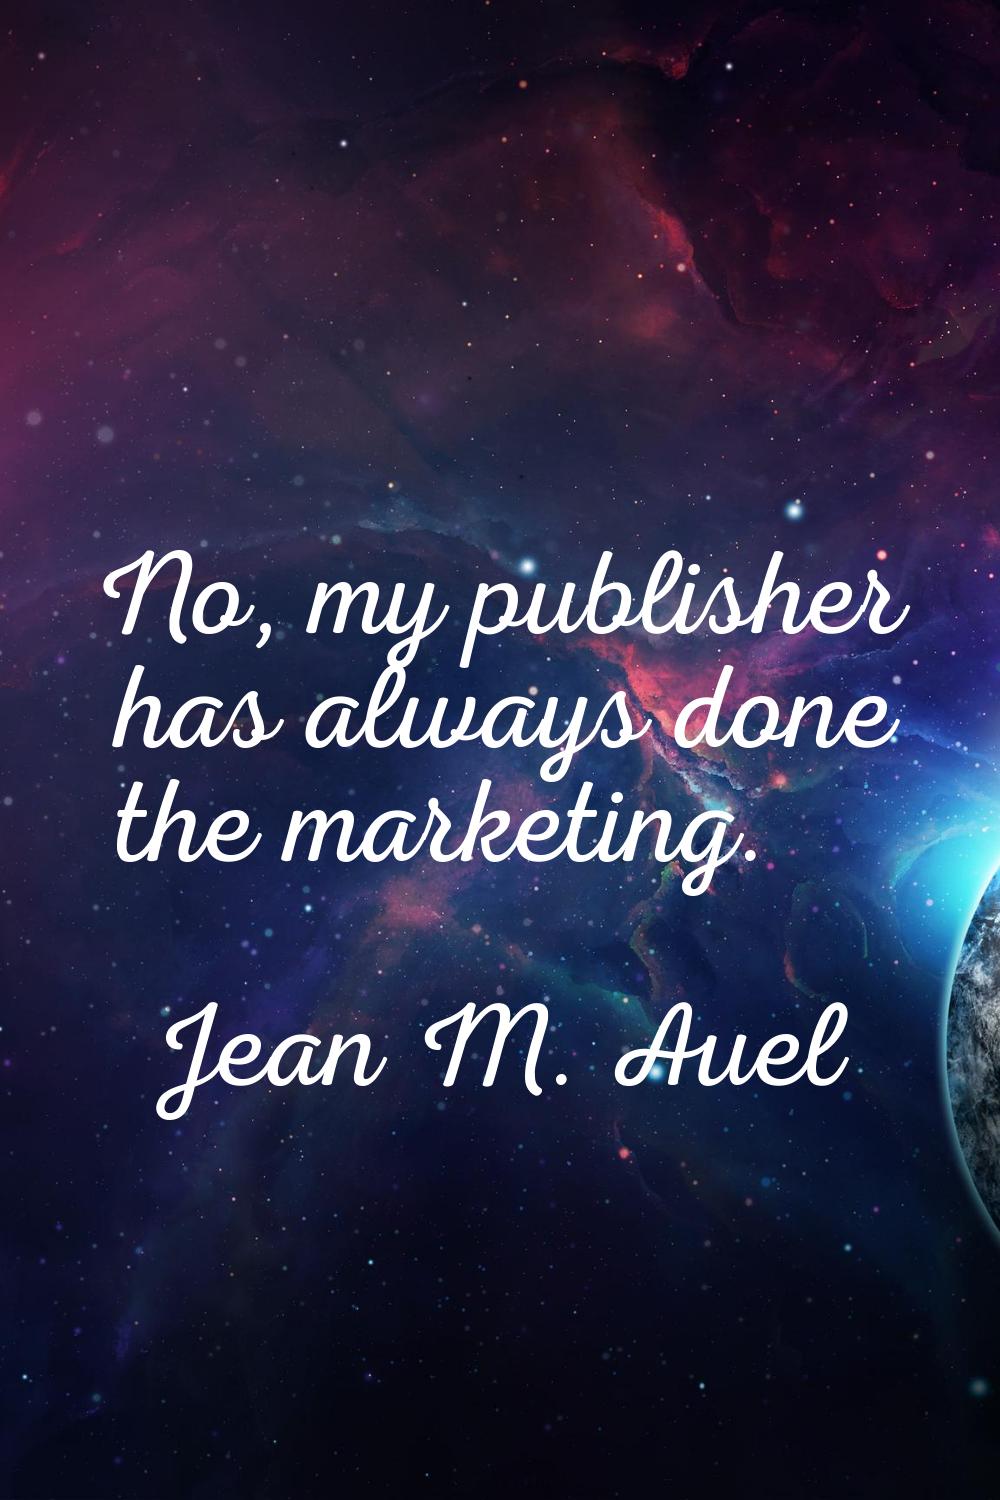 No, my publisher has always done the marketing.